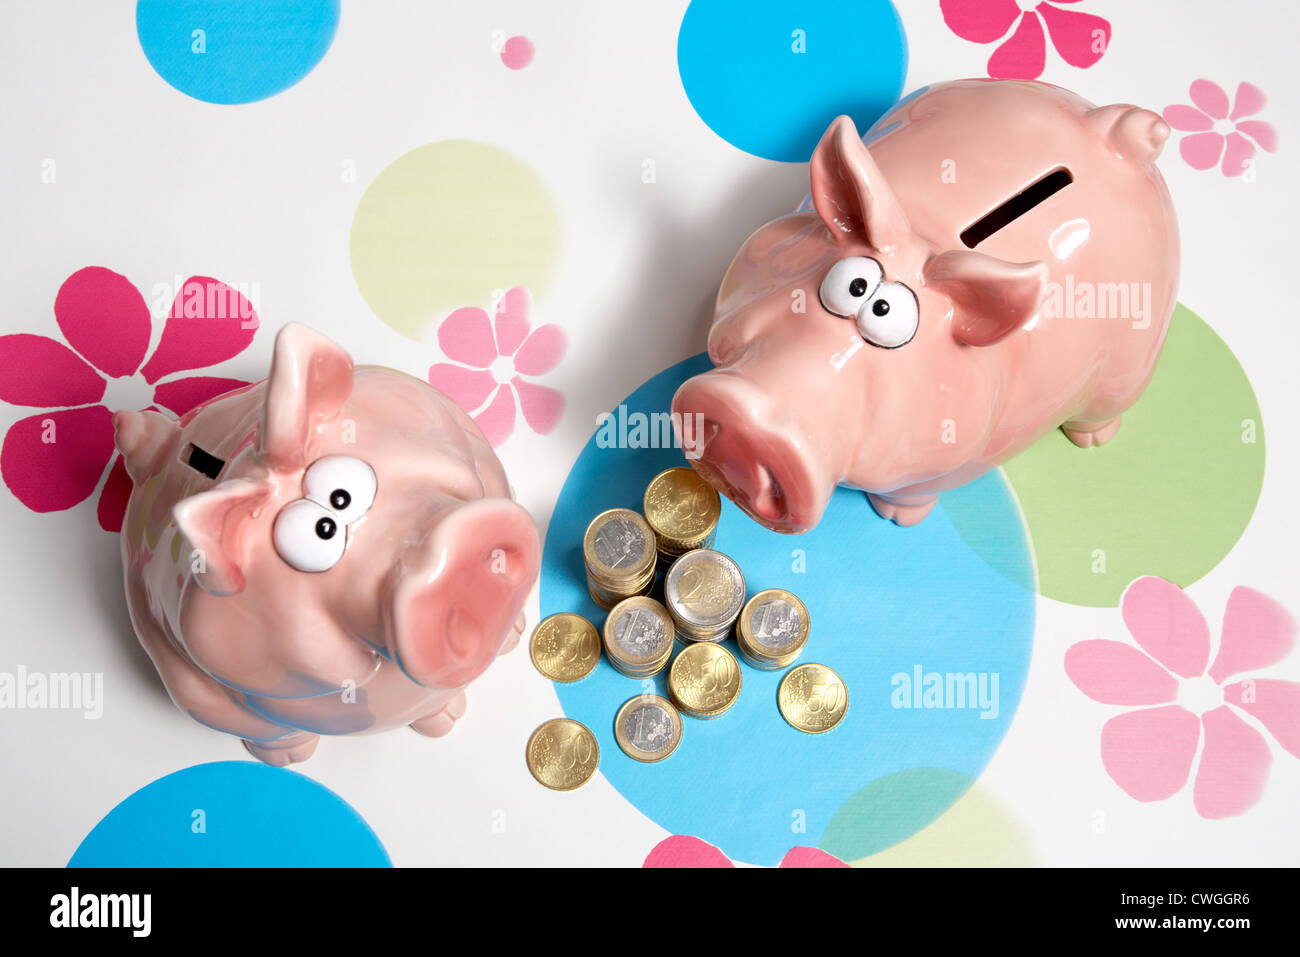 Piggy banks with Muenzstapeln on patterned background Stock Photo